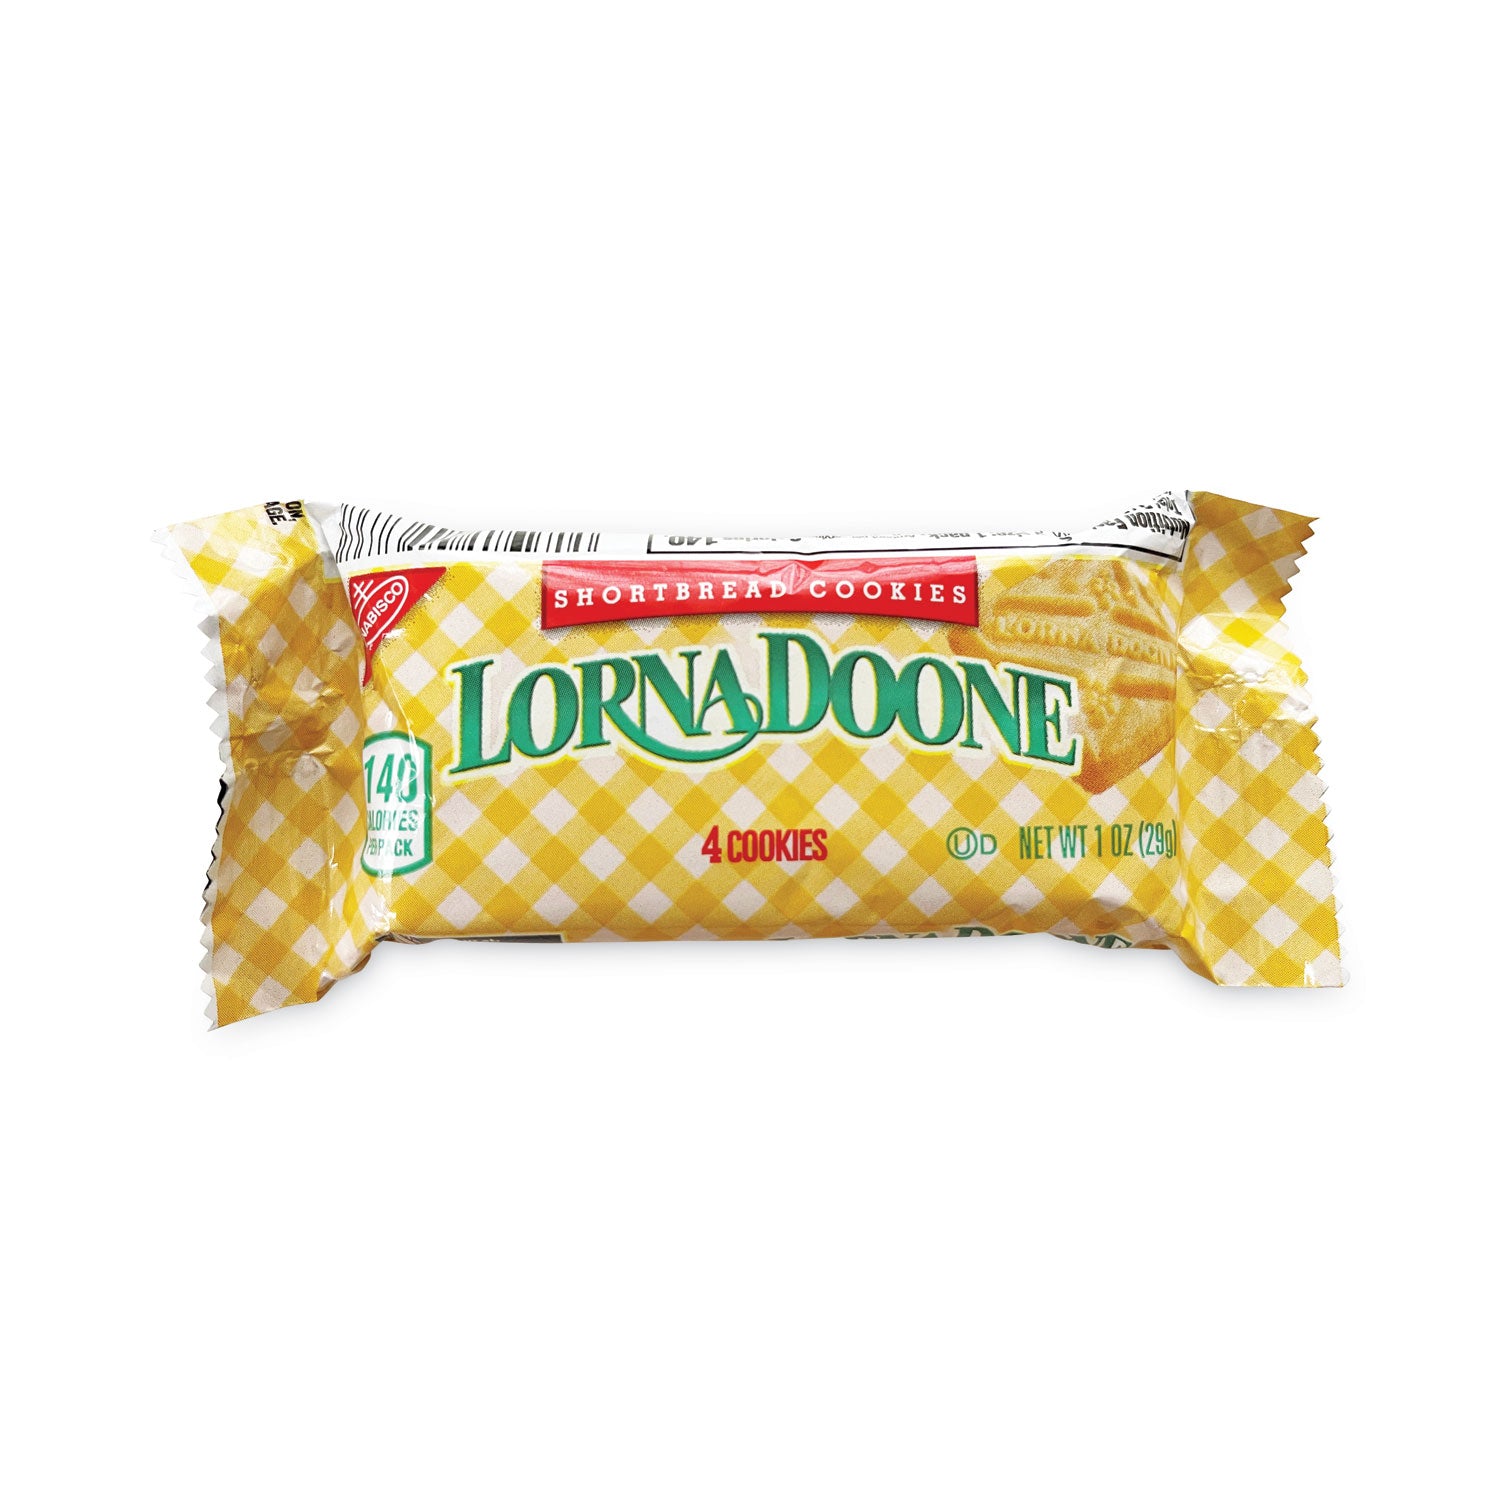 lorna-doone-shortbread-cookies-1-oz-packet-120-packets-box-4-boxes-carton-ships-in-1-3-business-days_grr30400097 - 1